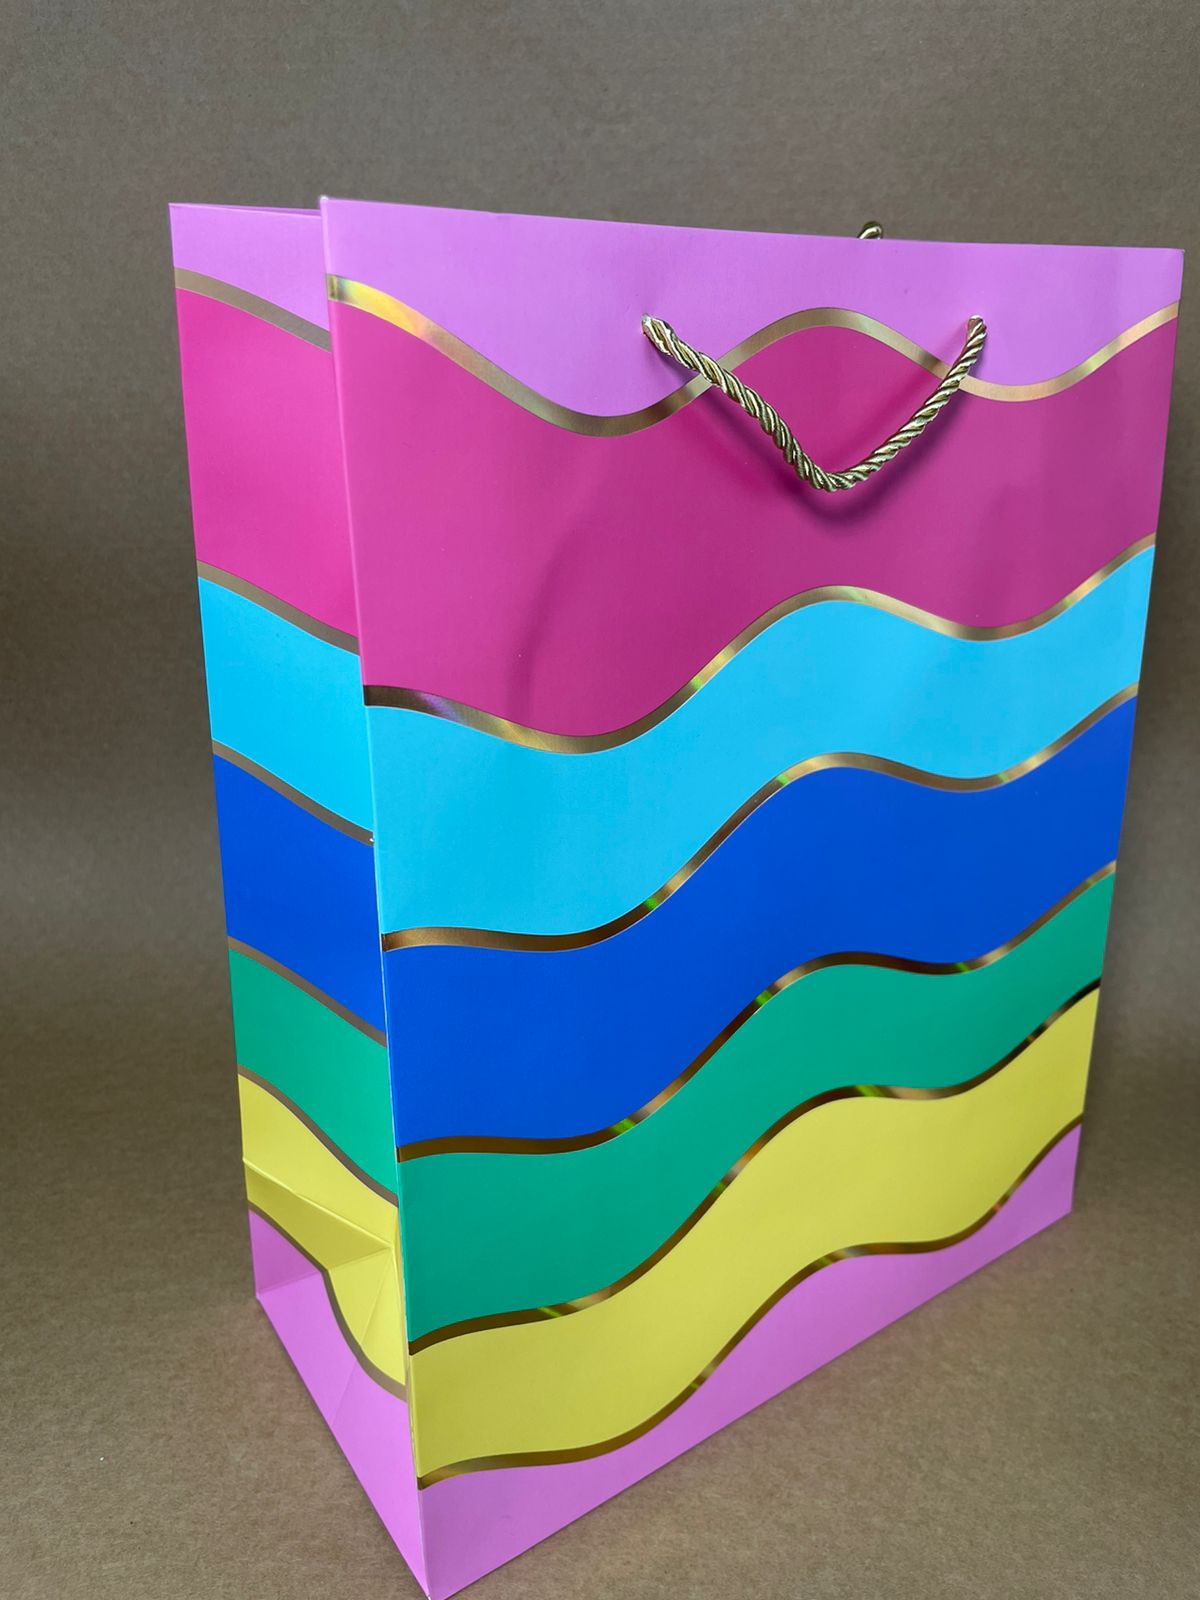 Wavy Golden Foiled Gift Bags